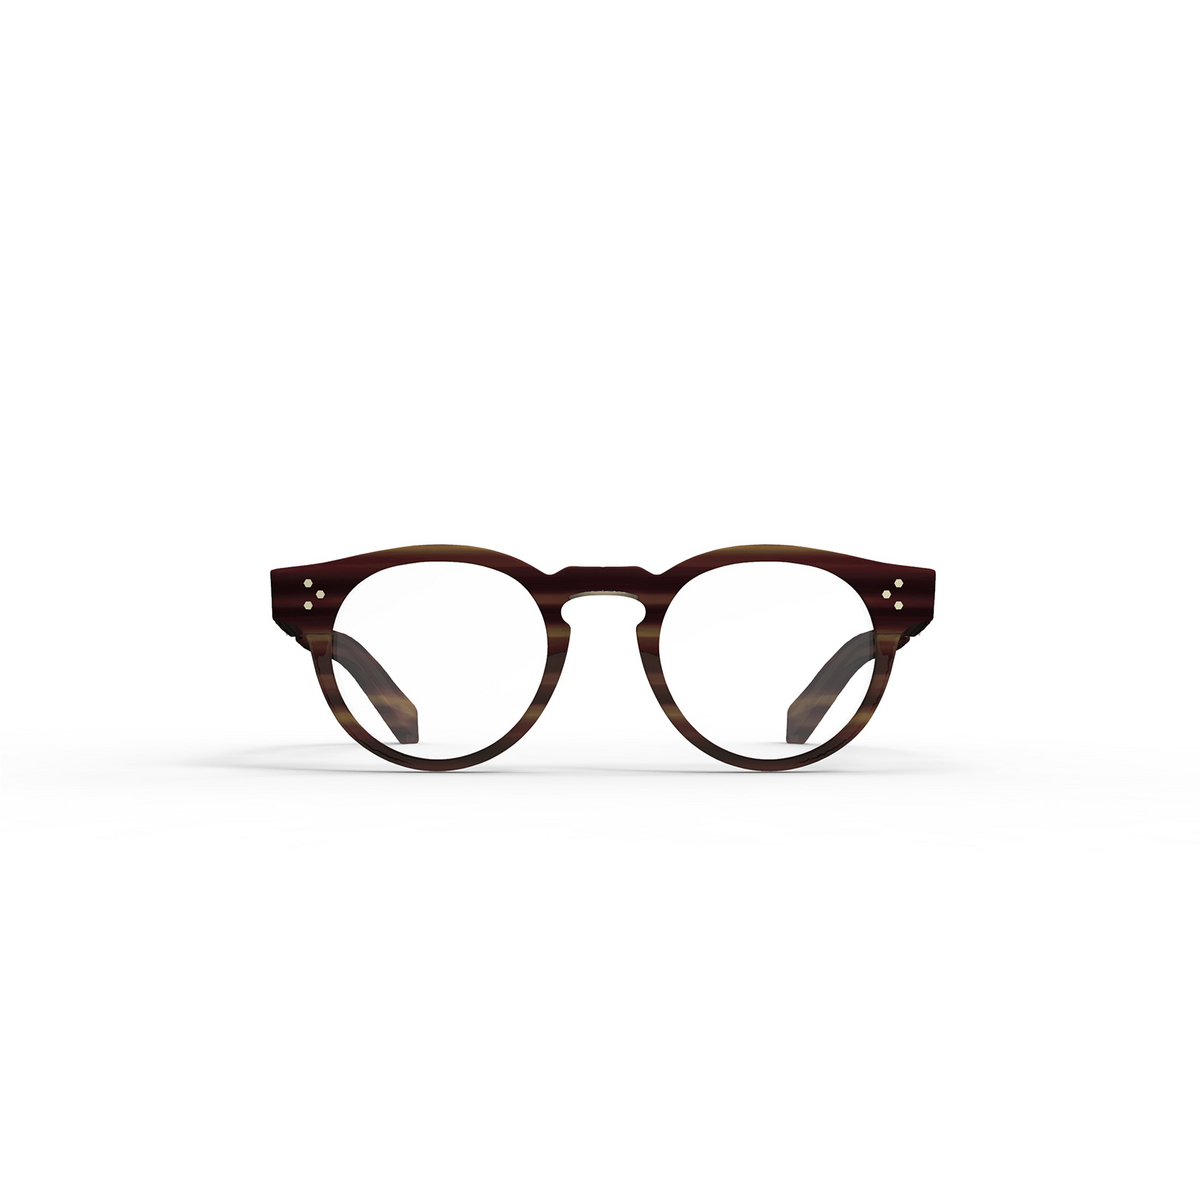 Mr. Leight® Round Eyeglasses: Kennedy C color Matte Driftwood-antique Gold Ii Mdrftwd-atgii - front view.